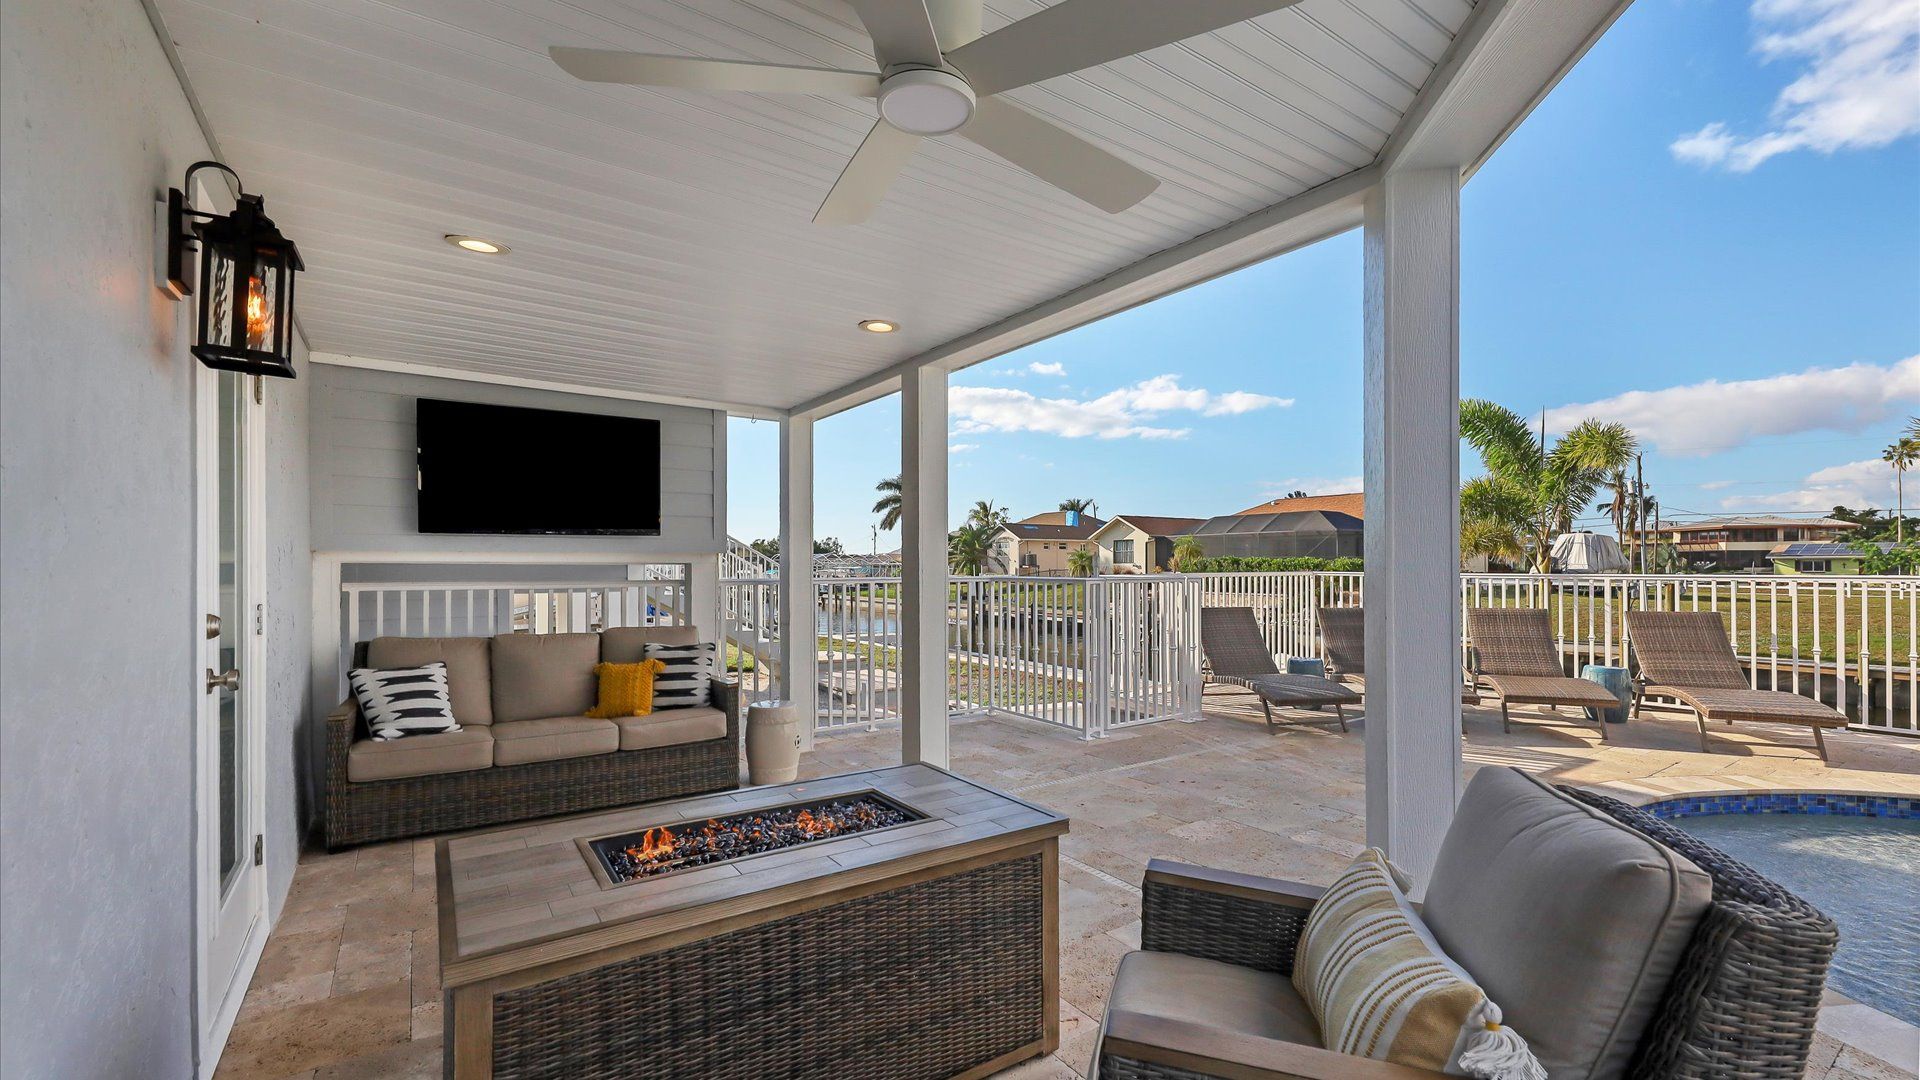 The pool deck is the perfect place to spend your time with a fire table and comfortable seating for gatherings